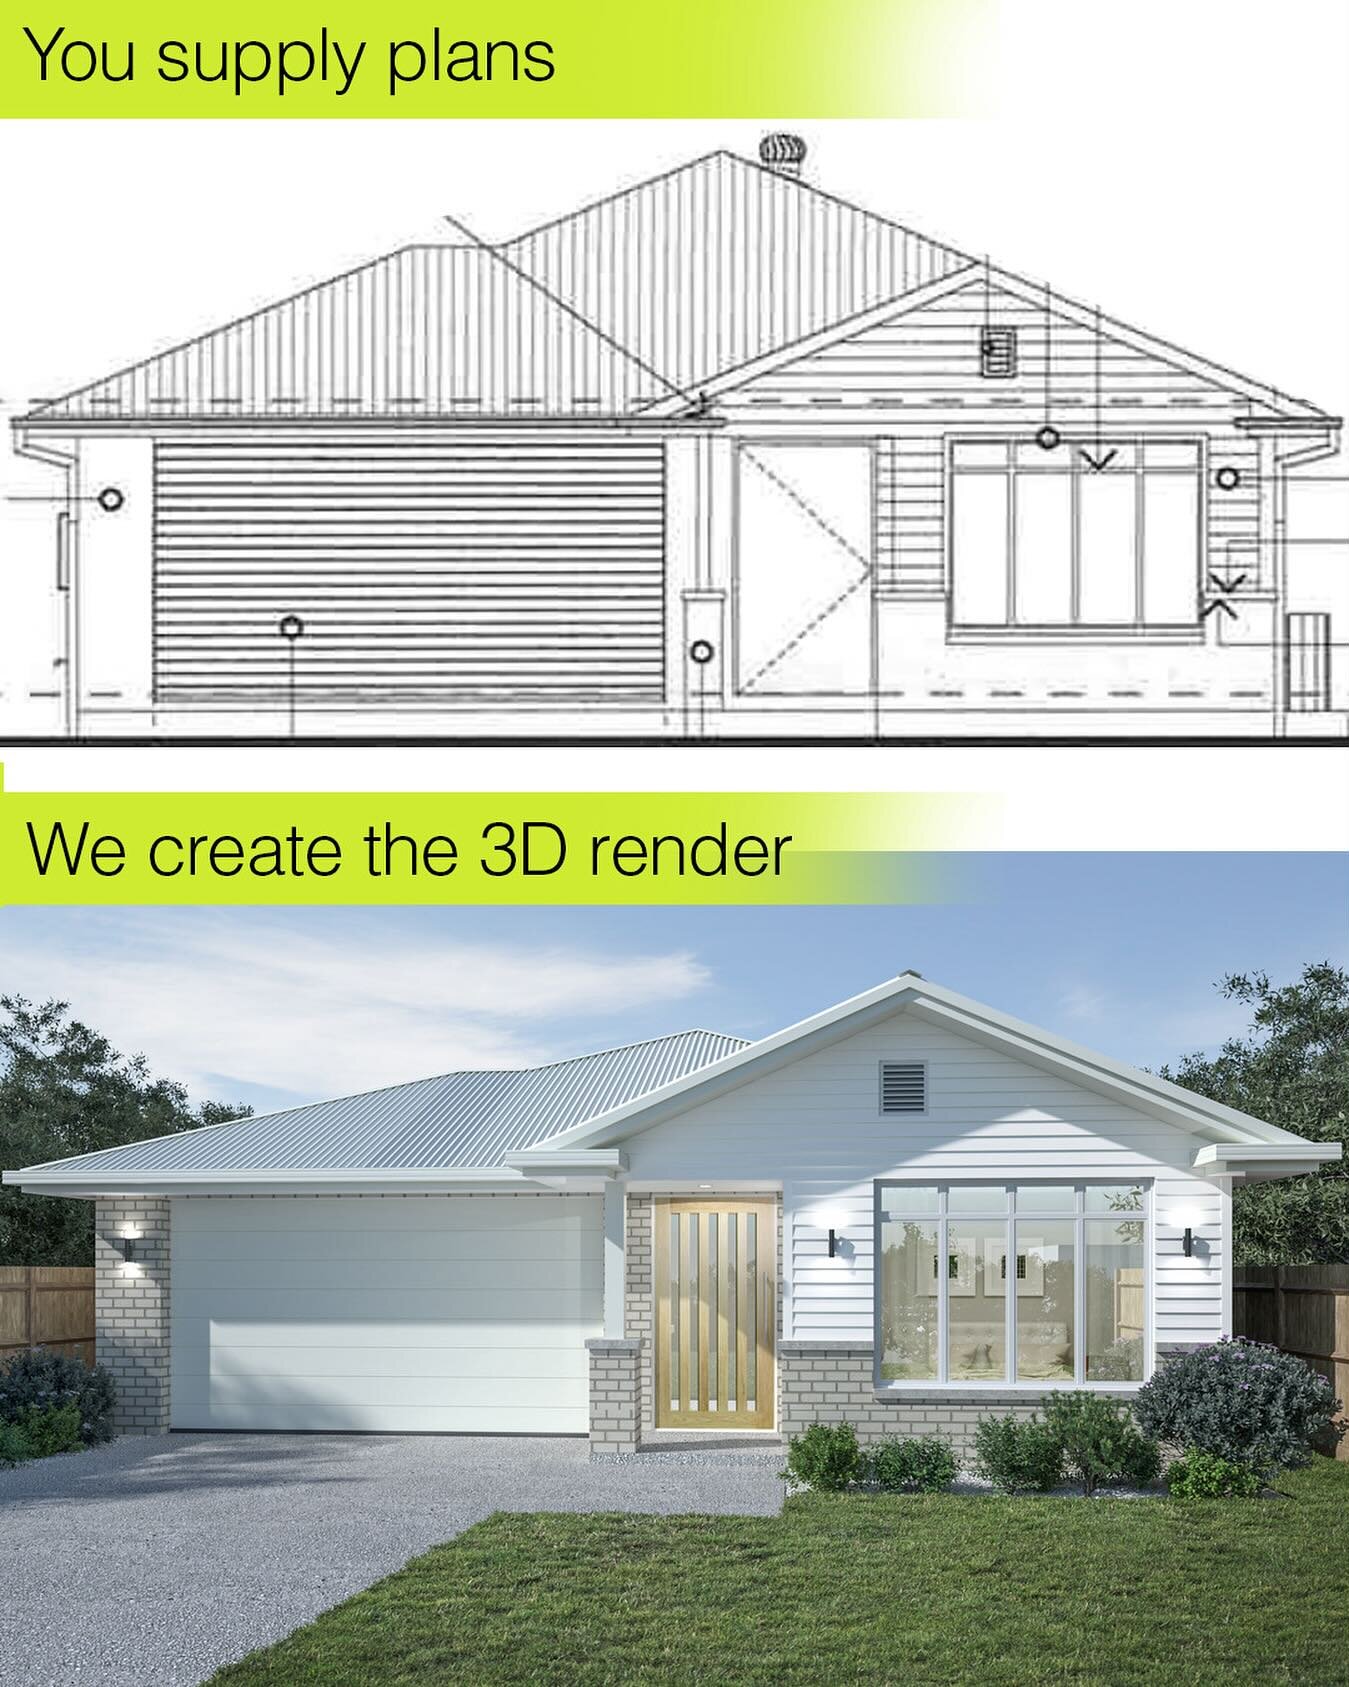 Propel Your Property to Market with Swift 3D Renders for Faster Sales! Get an Instant Quote Today.

Plans ready? Email the PDF for instant quotation: studio@thecampaignco.com.au 
Prefer to chat?
We can talk now: 0409 861 401

#3drenders #artistimpres